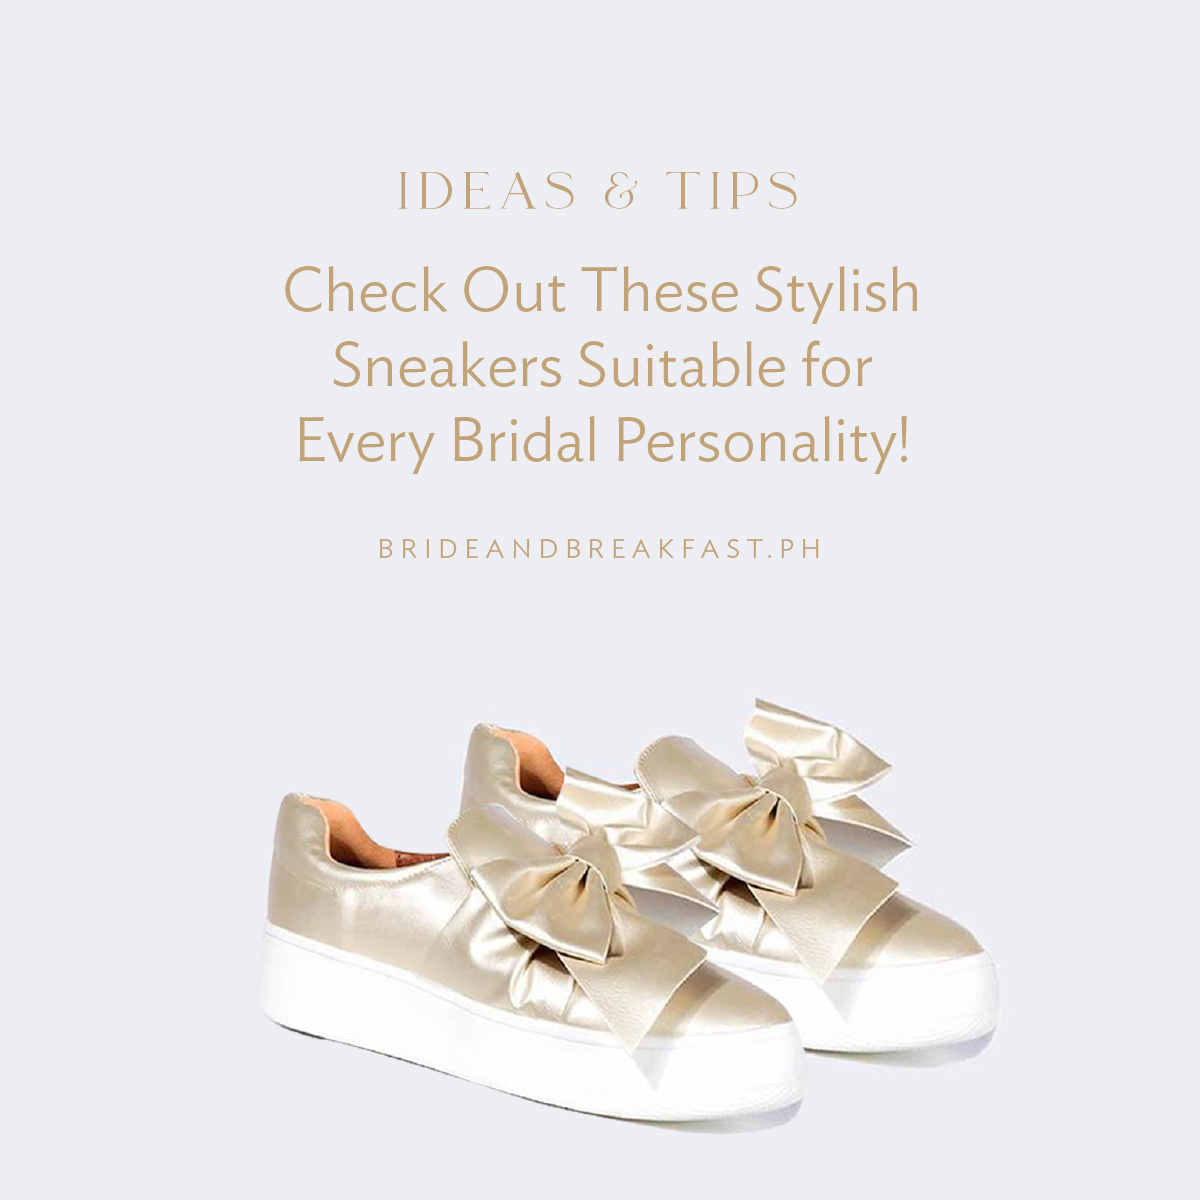 Check Out These 18 Stylish Sneakers Suitable for Every Bridal Personality!